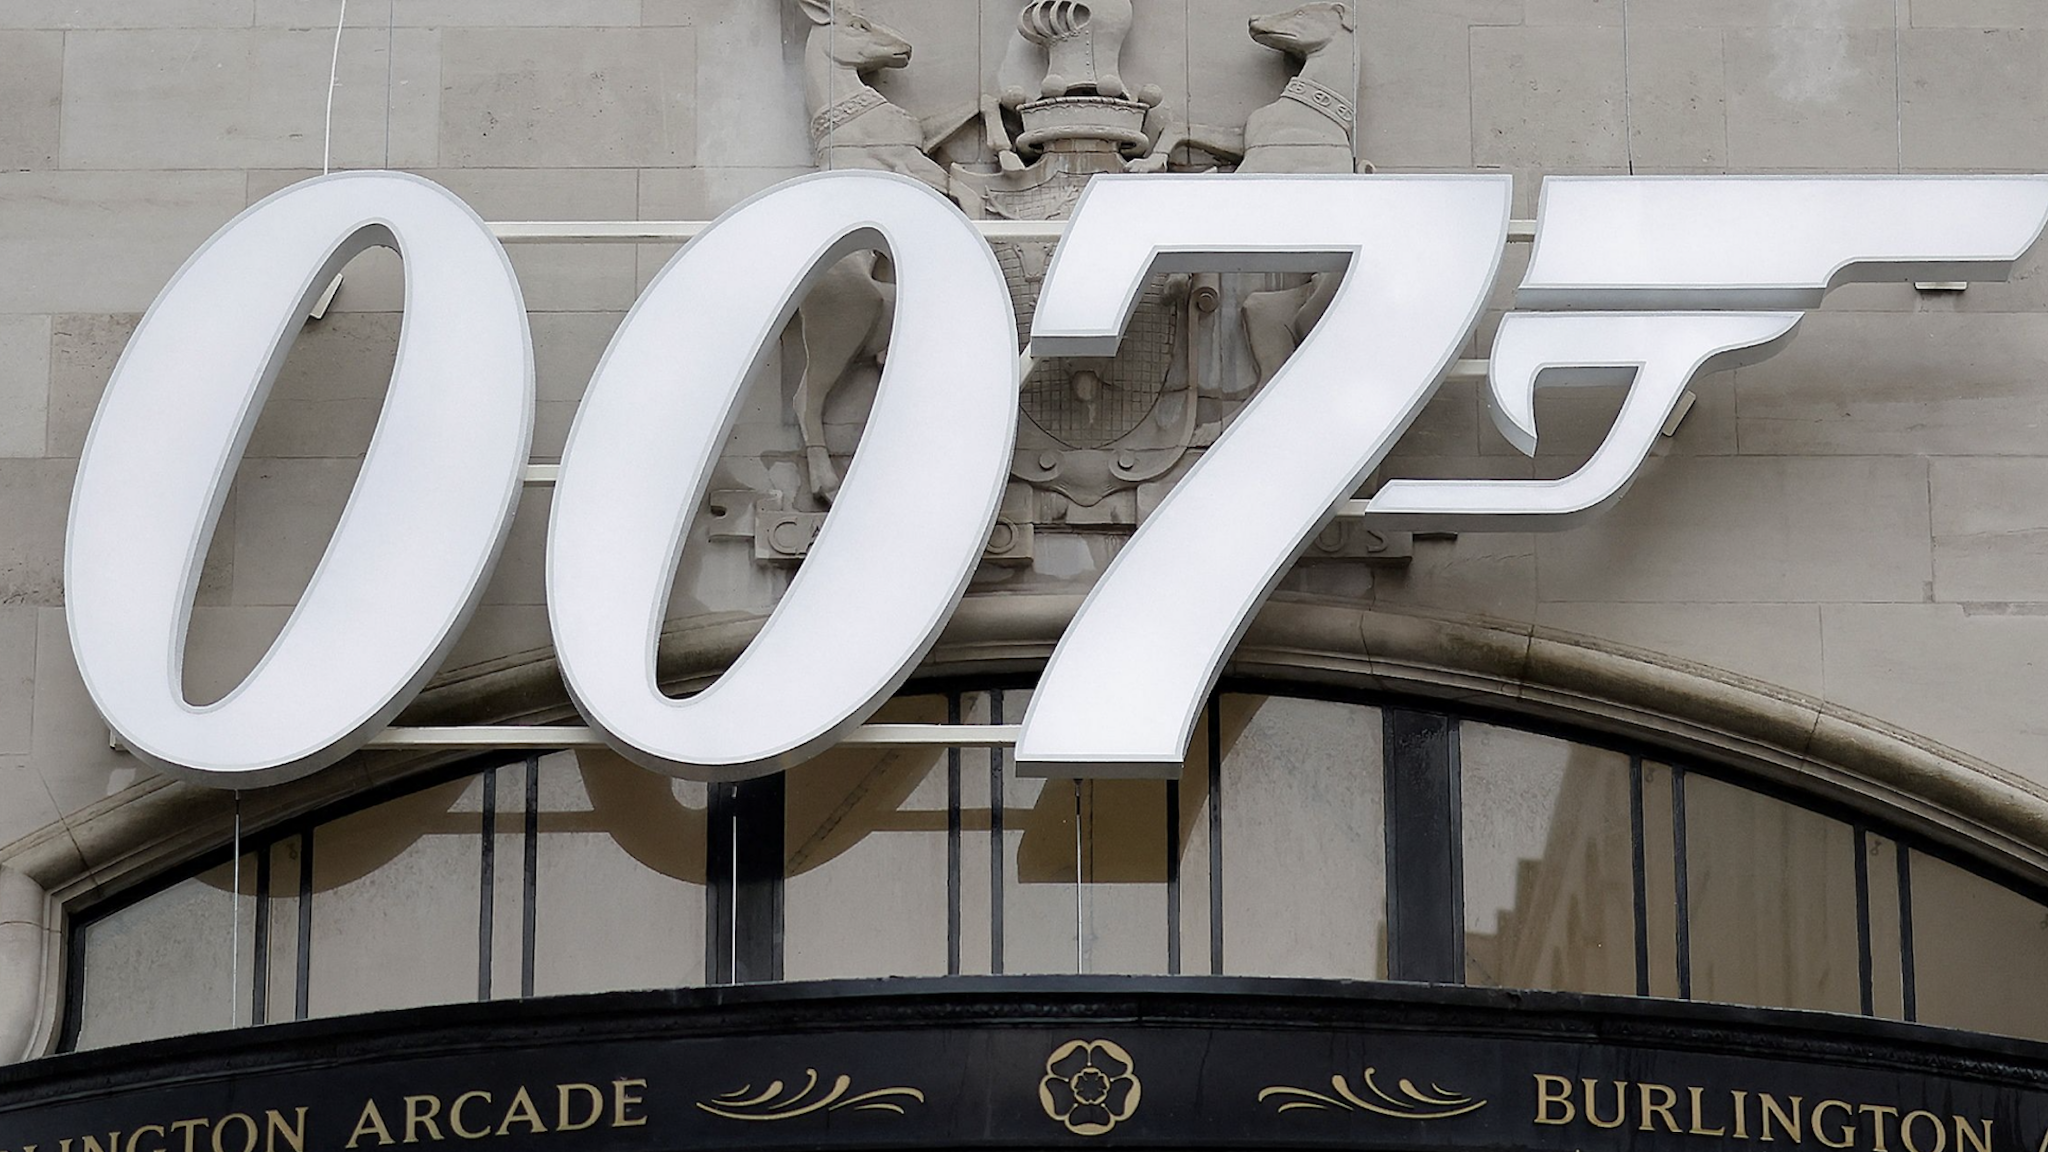 A pedestrian walks past a James Bond 007 logo above the entrance to Burlington Arcade in London on October 4, 2021, following the release of the latest James Bond film "No Time To Die" .